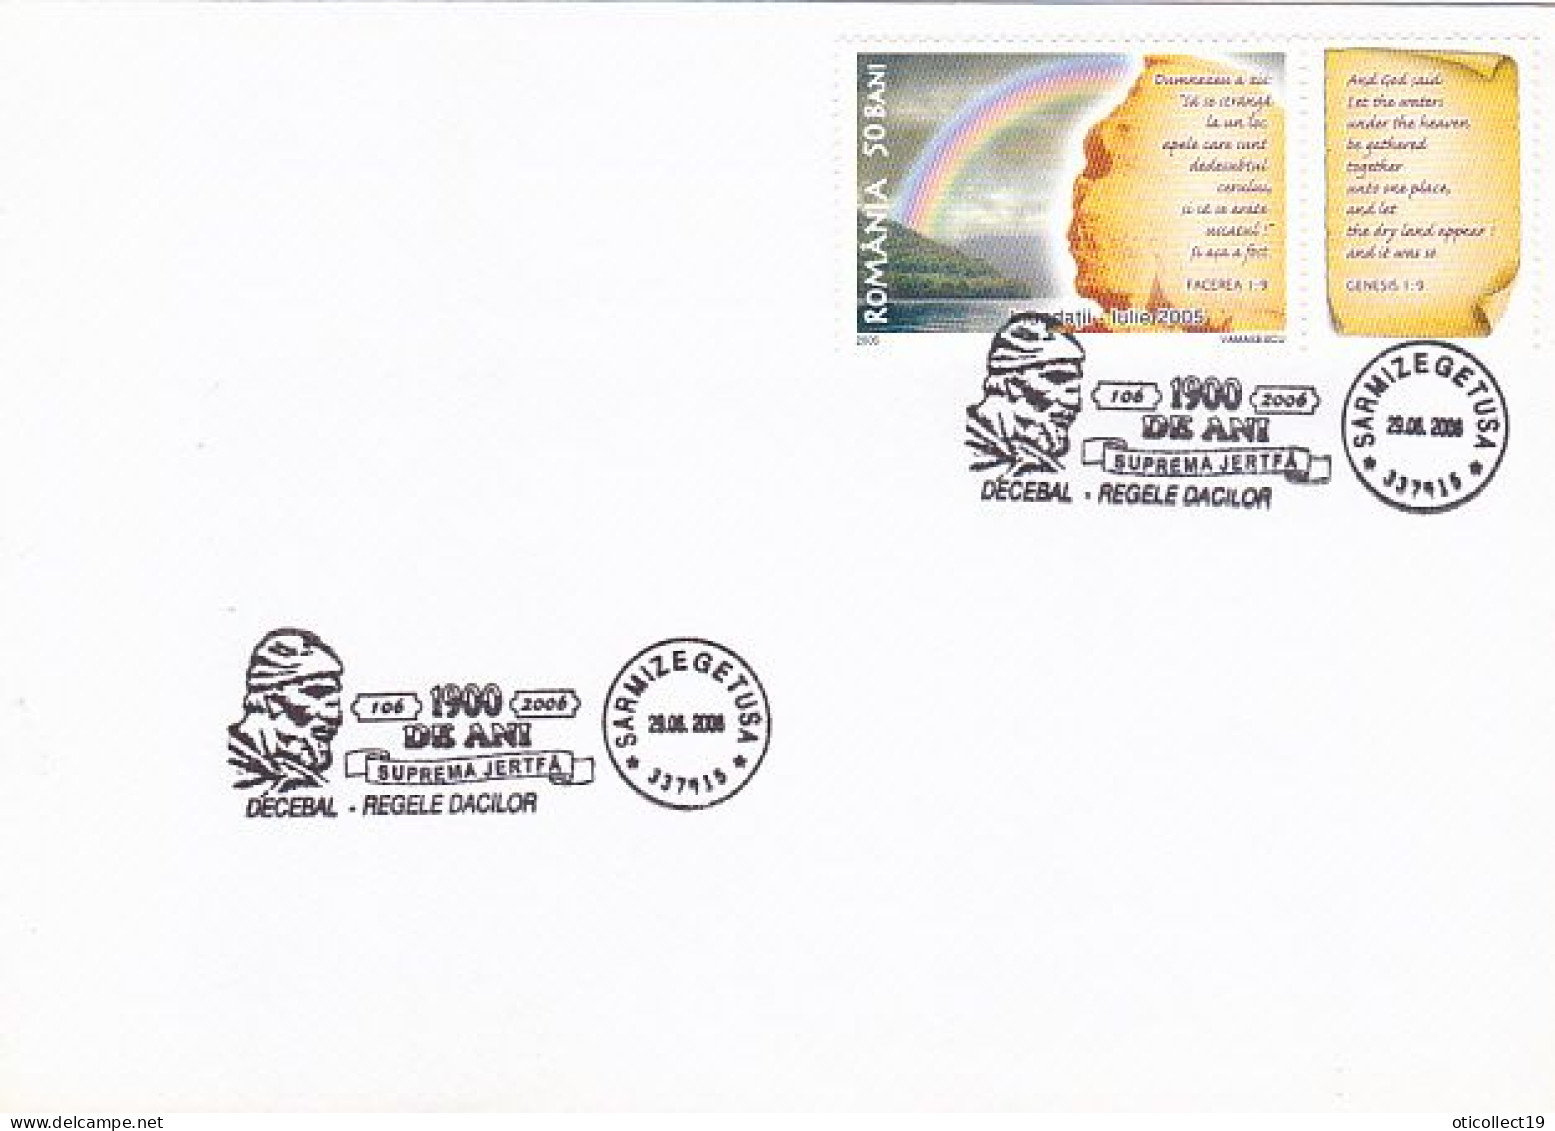 KING DECEBALUS OF DACIA SPECIAL POSTMARKS, 2005 FLOODS RELIEF STAMP ON COVER, 2006, ROMANIA - Lettres & Documents